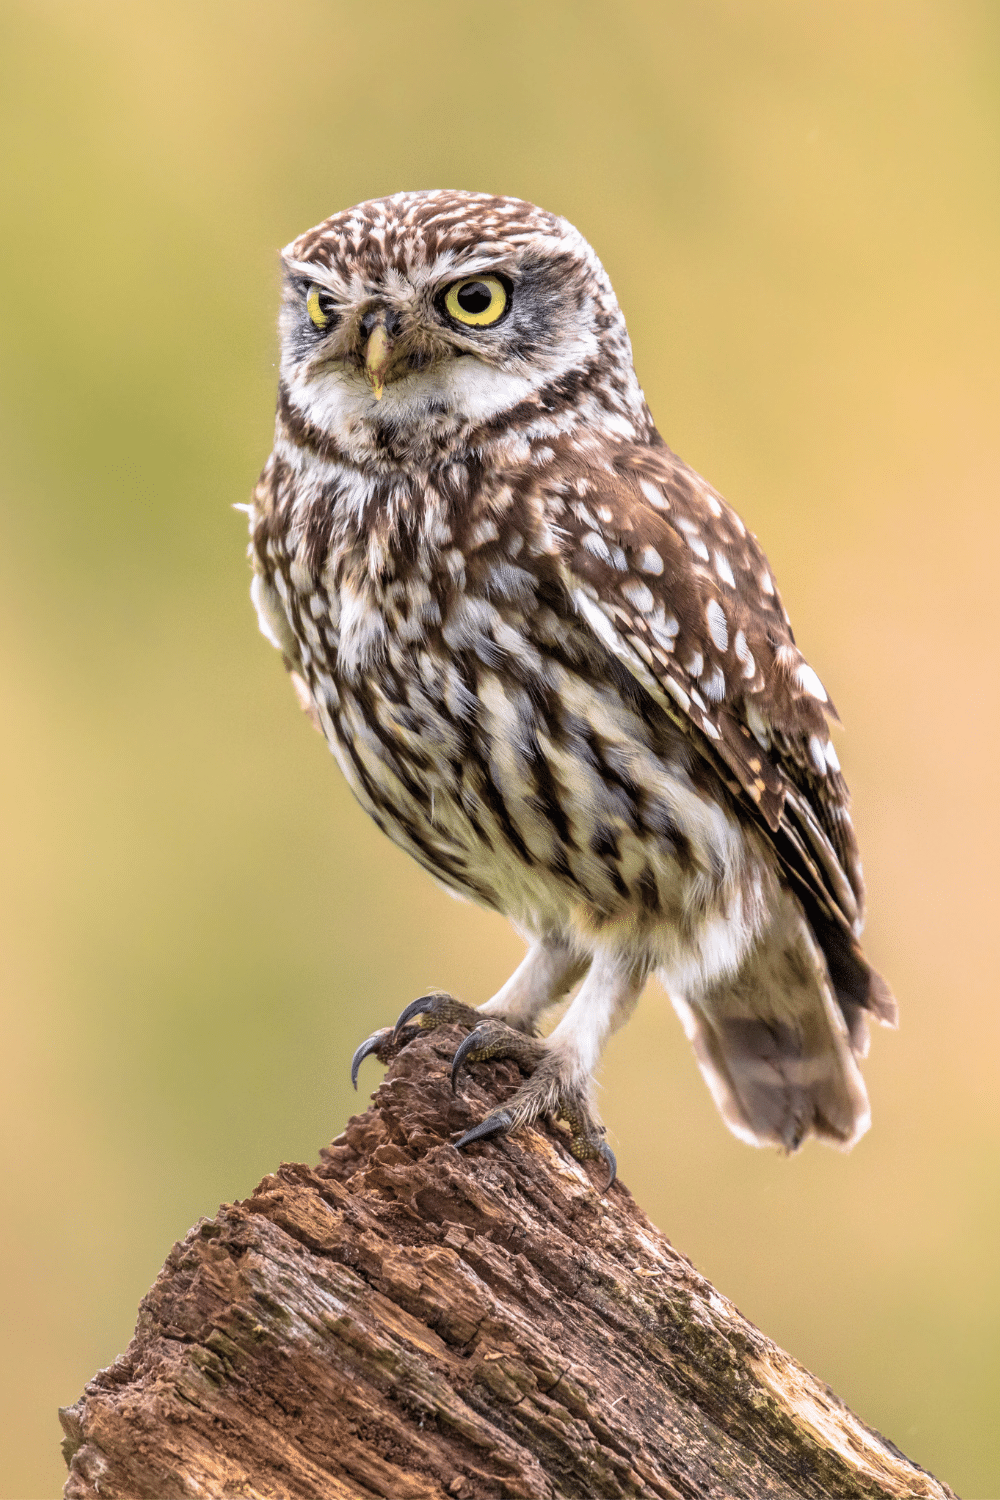 Observation Of A Perched Owl